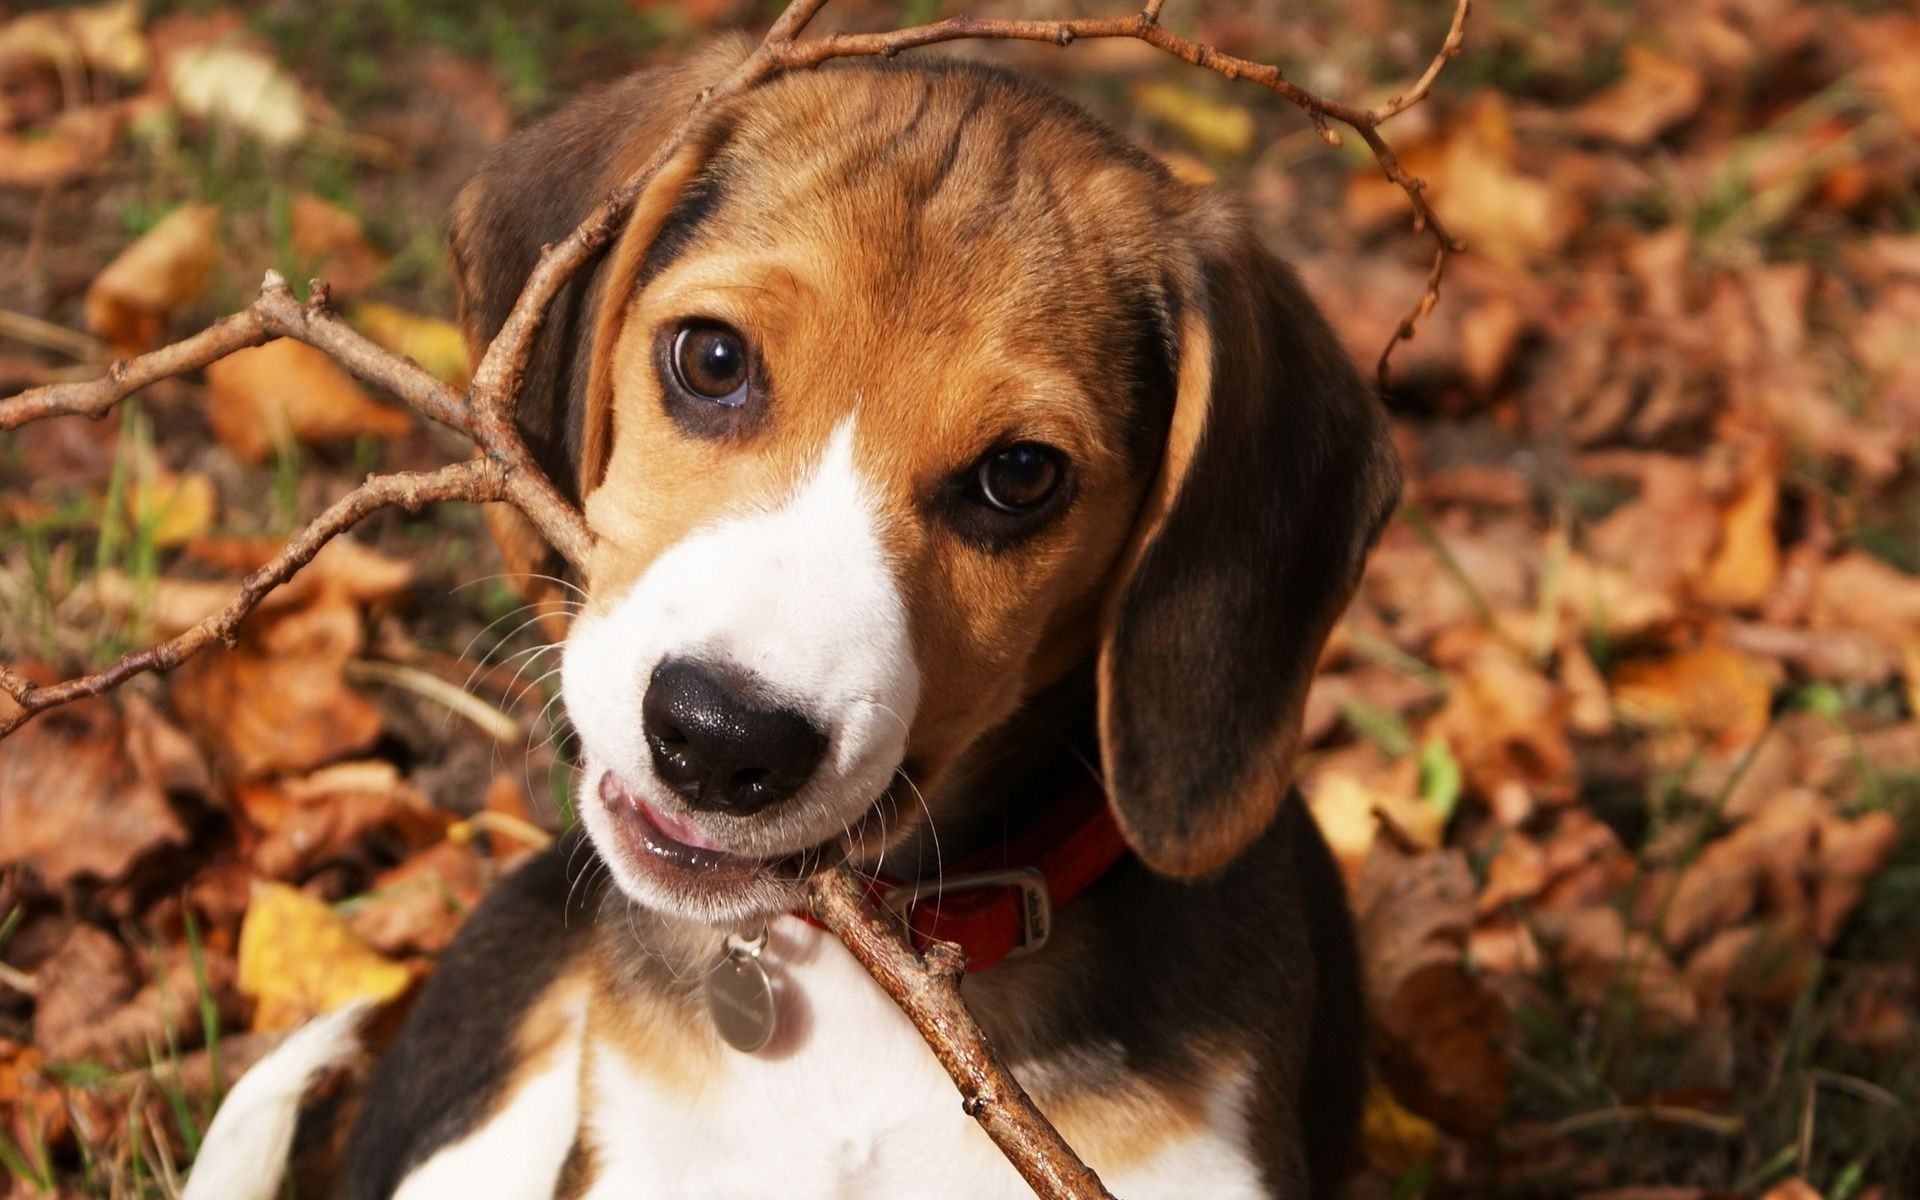 dogs dog mammal animal cute pet canine beagle nature puppy portrait hound young adorable little domestic breed